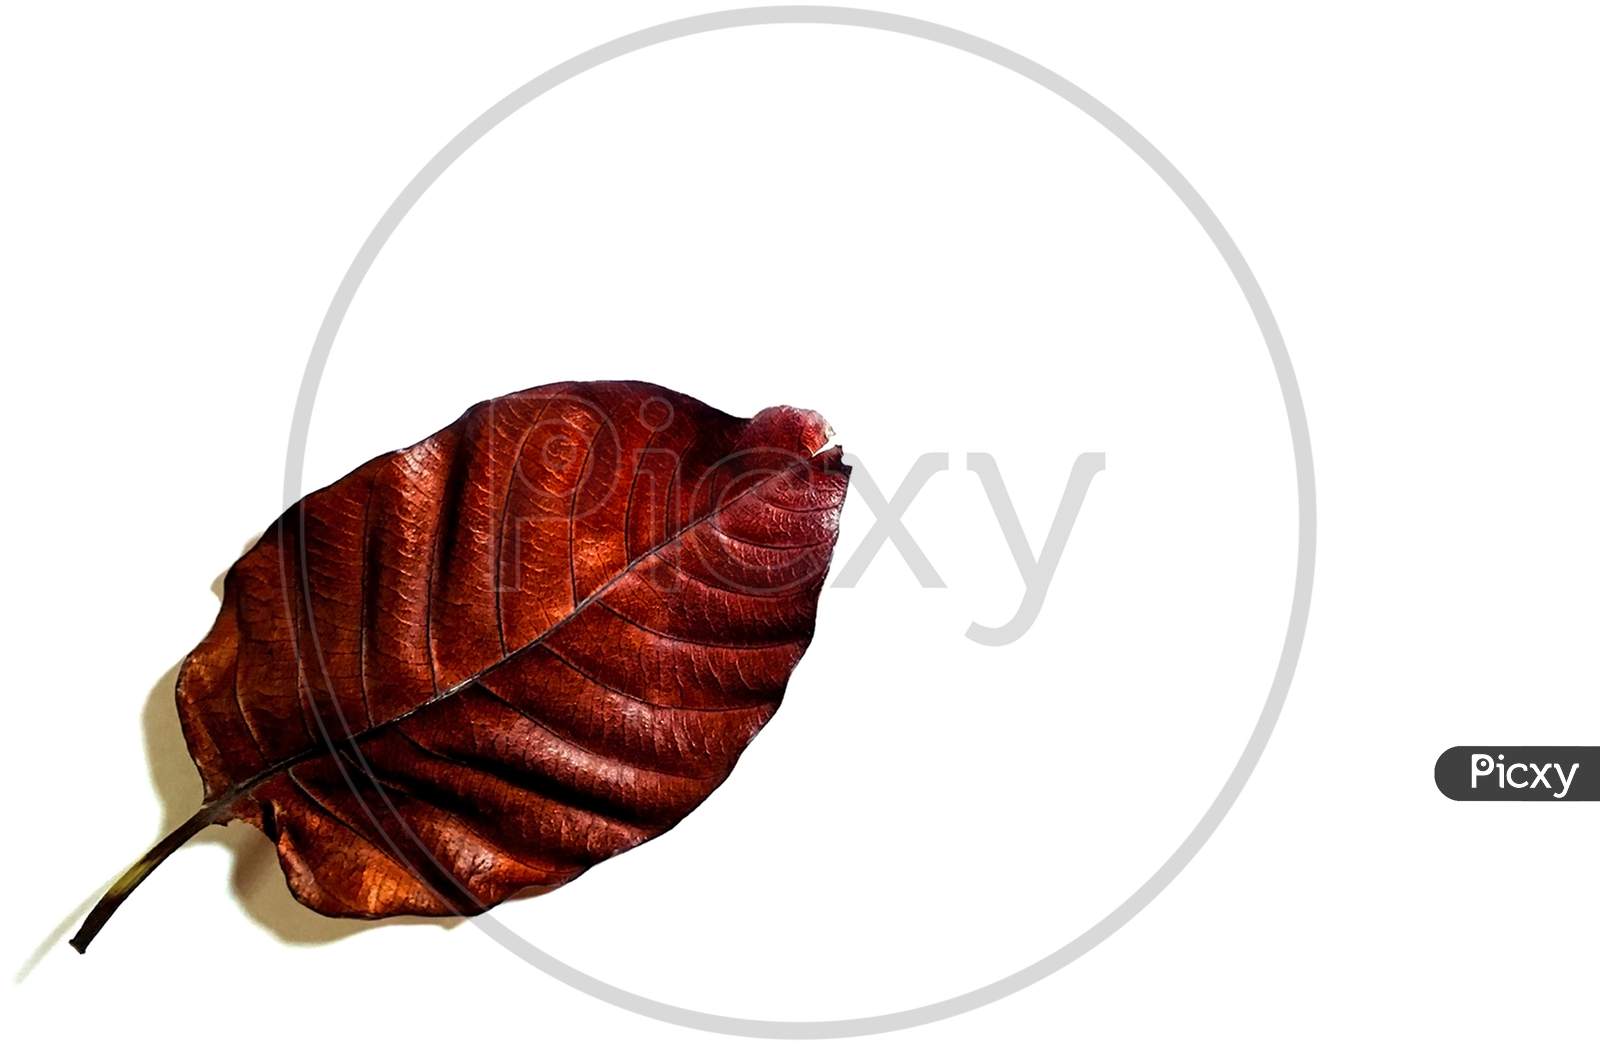 Dry leaf isolated on white background